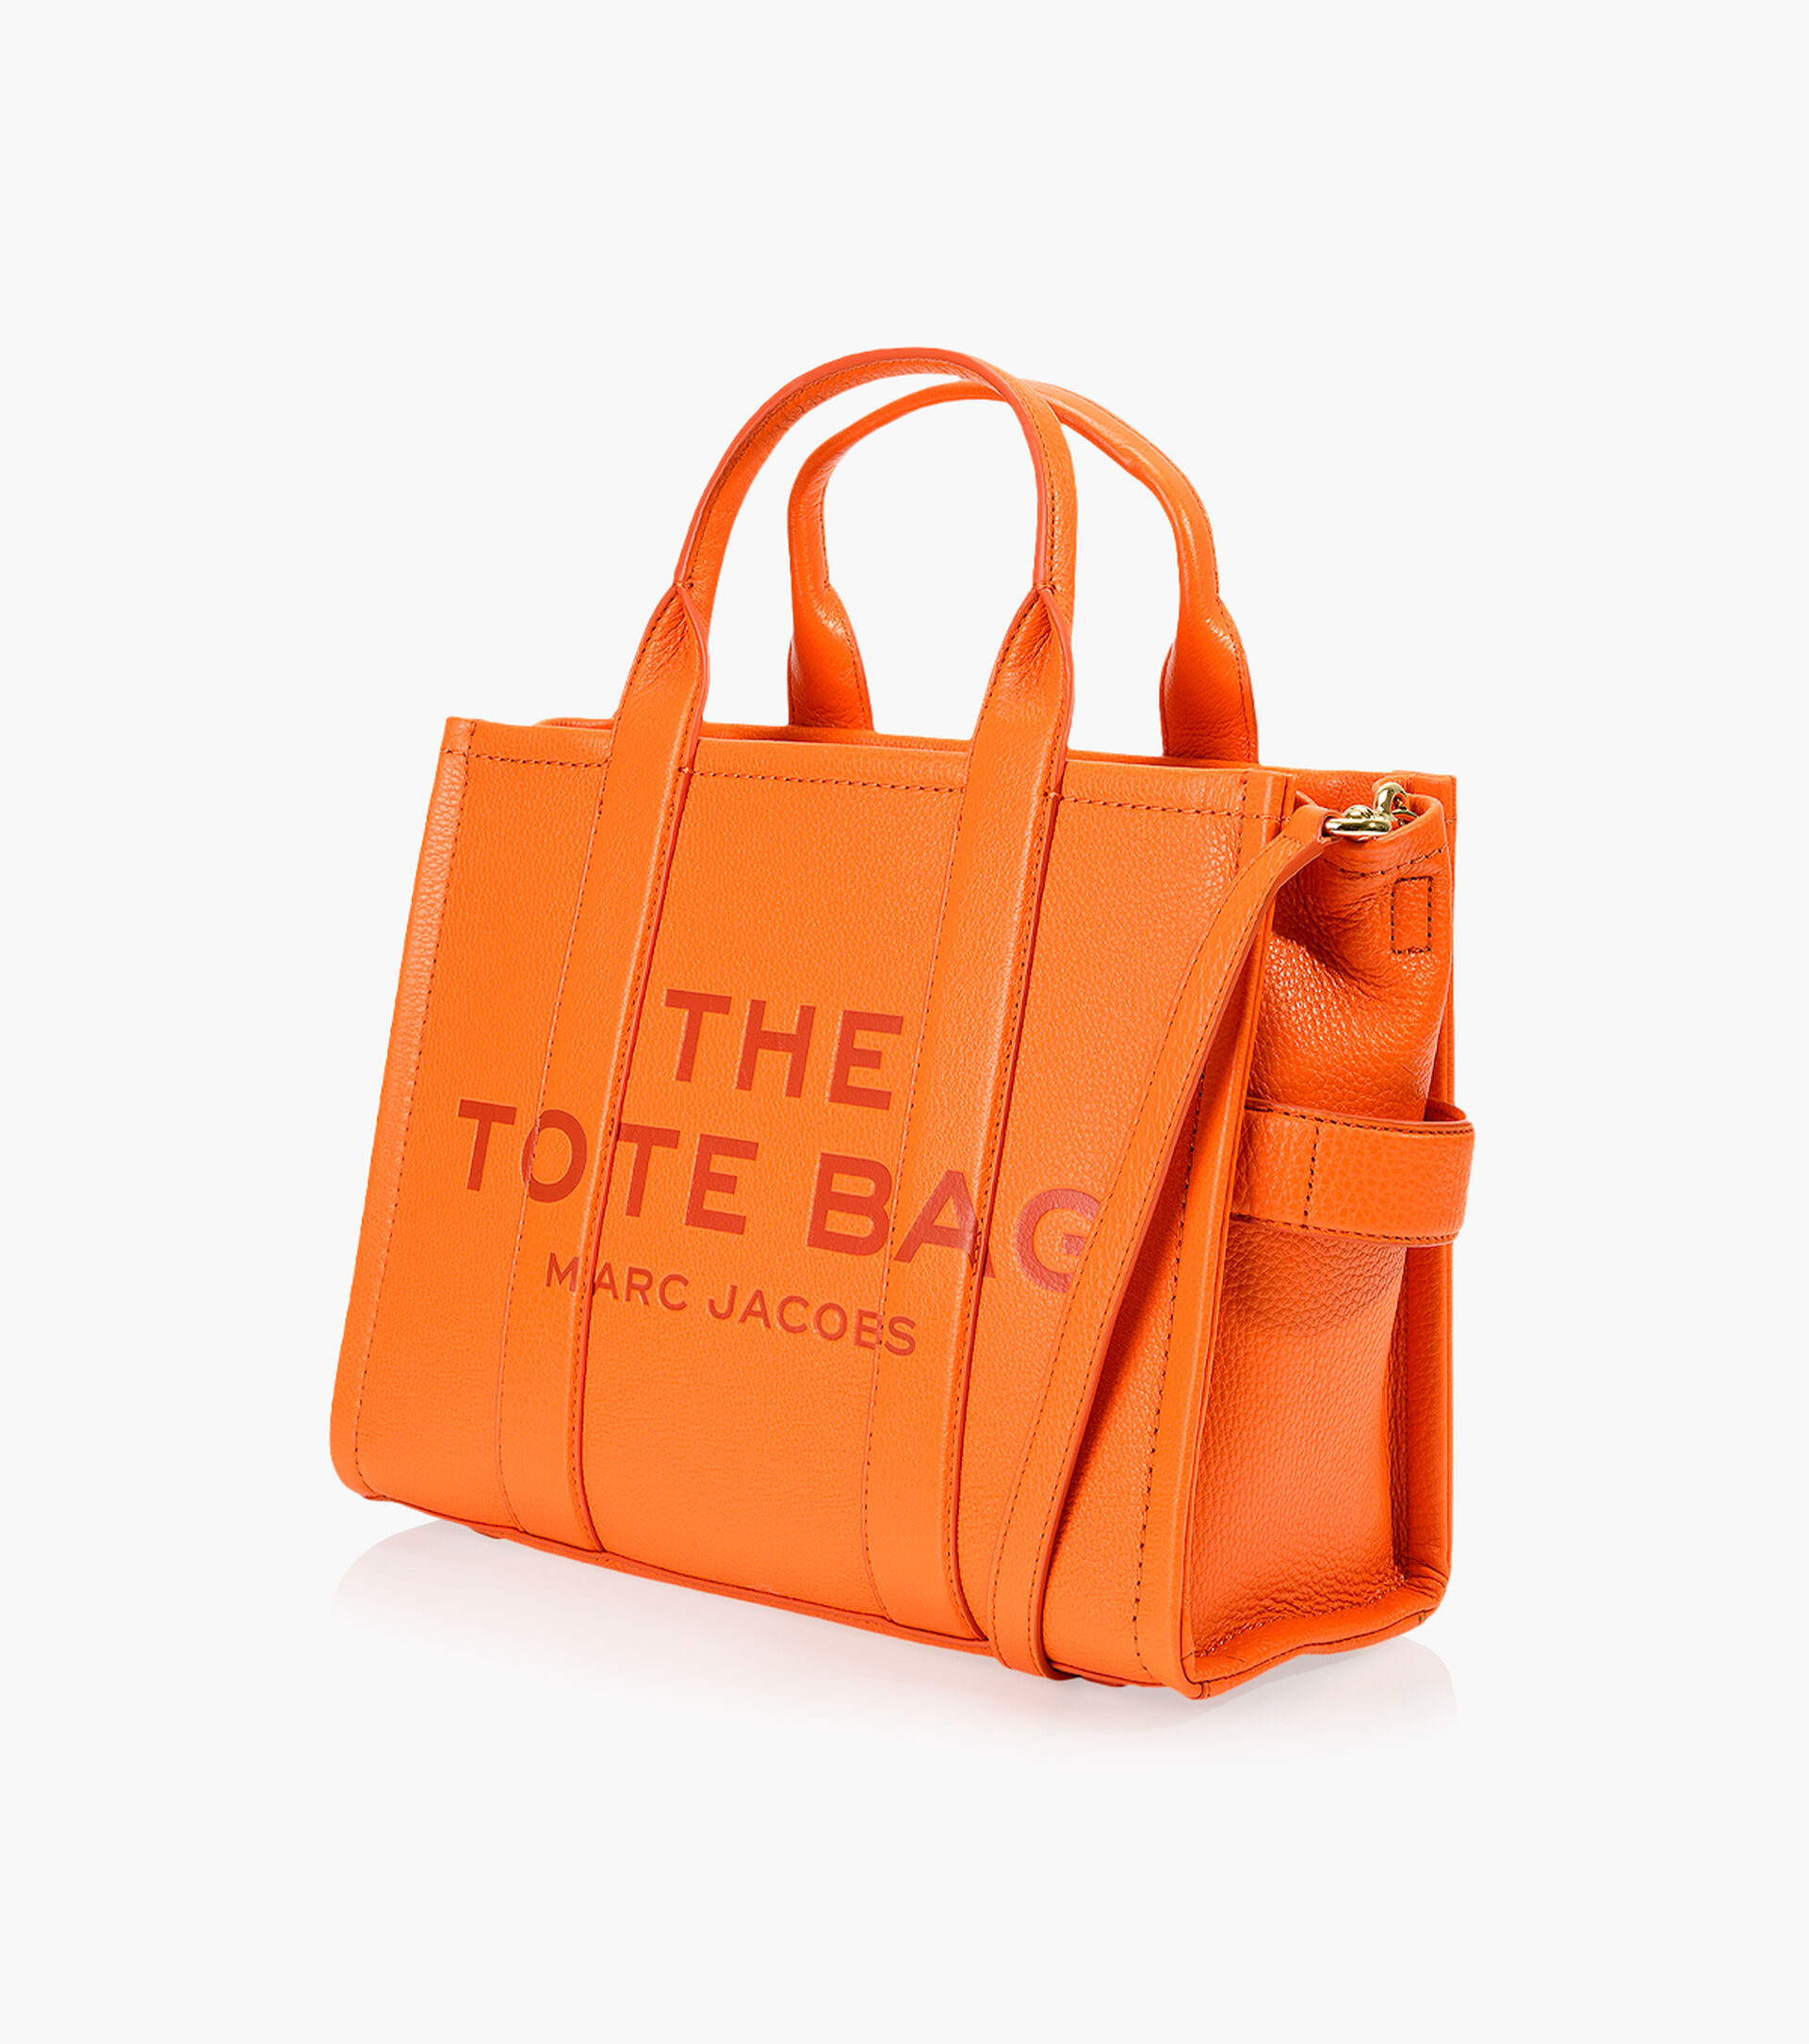 MARC JACOBS THE LEATHER TOTE BAG - Orange Leather | Browns Shoes